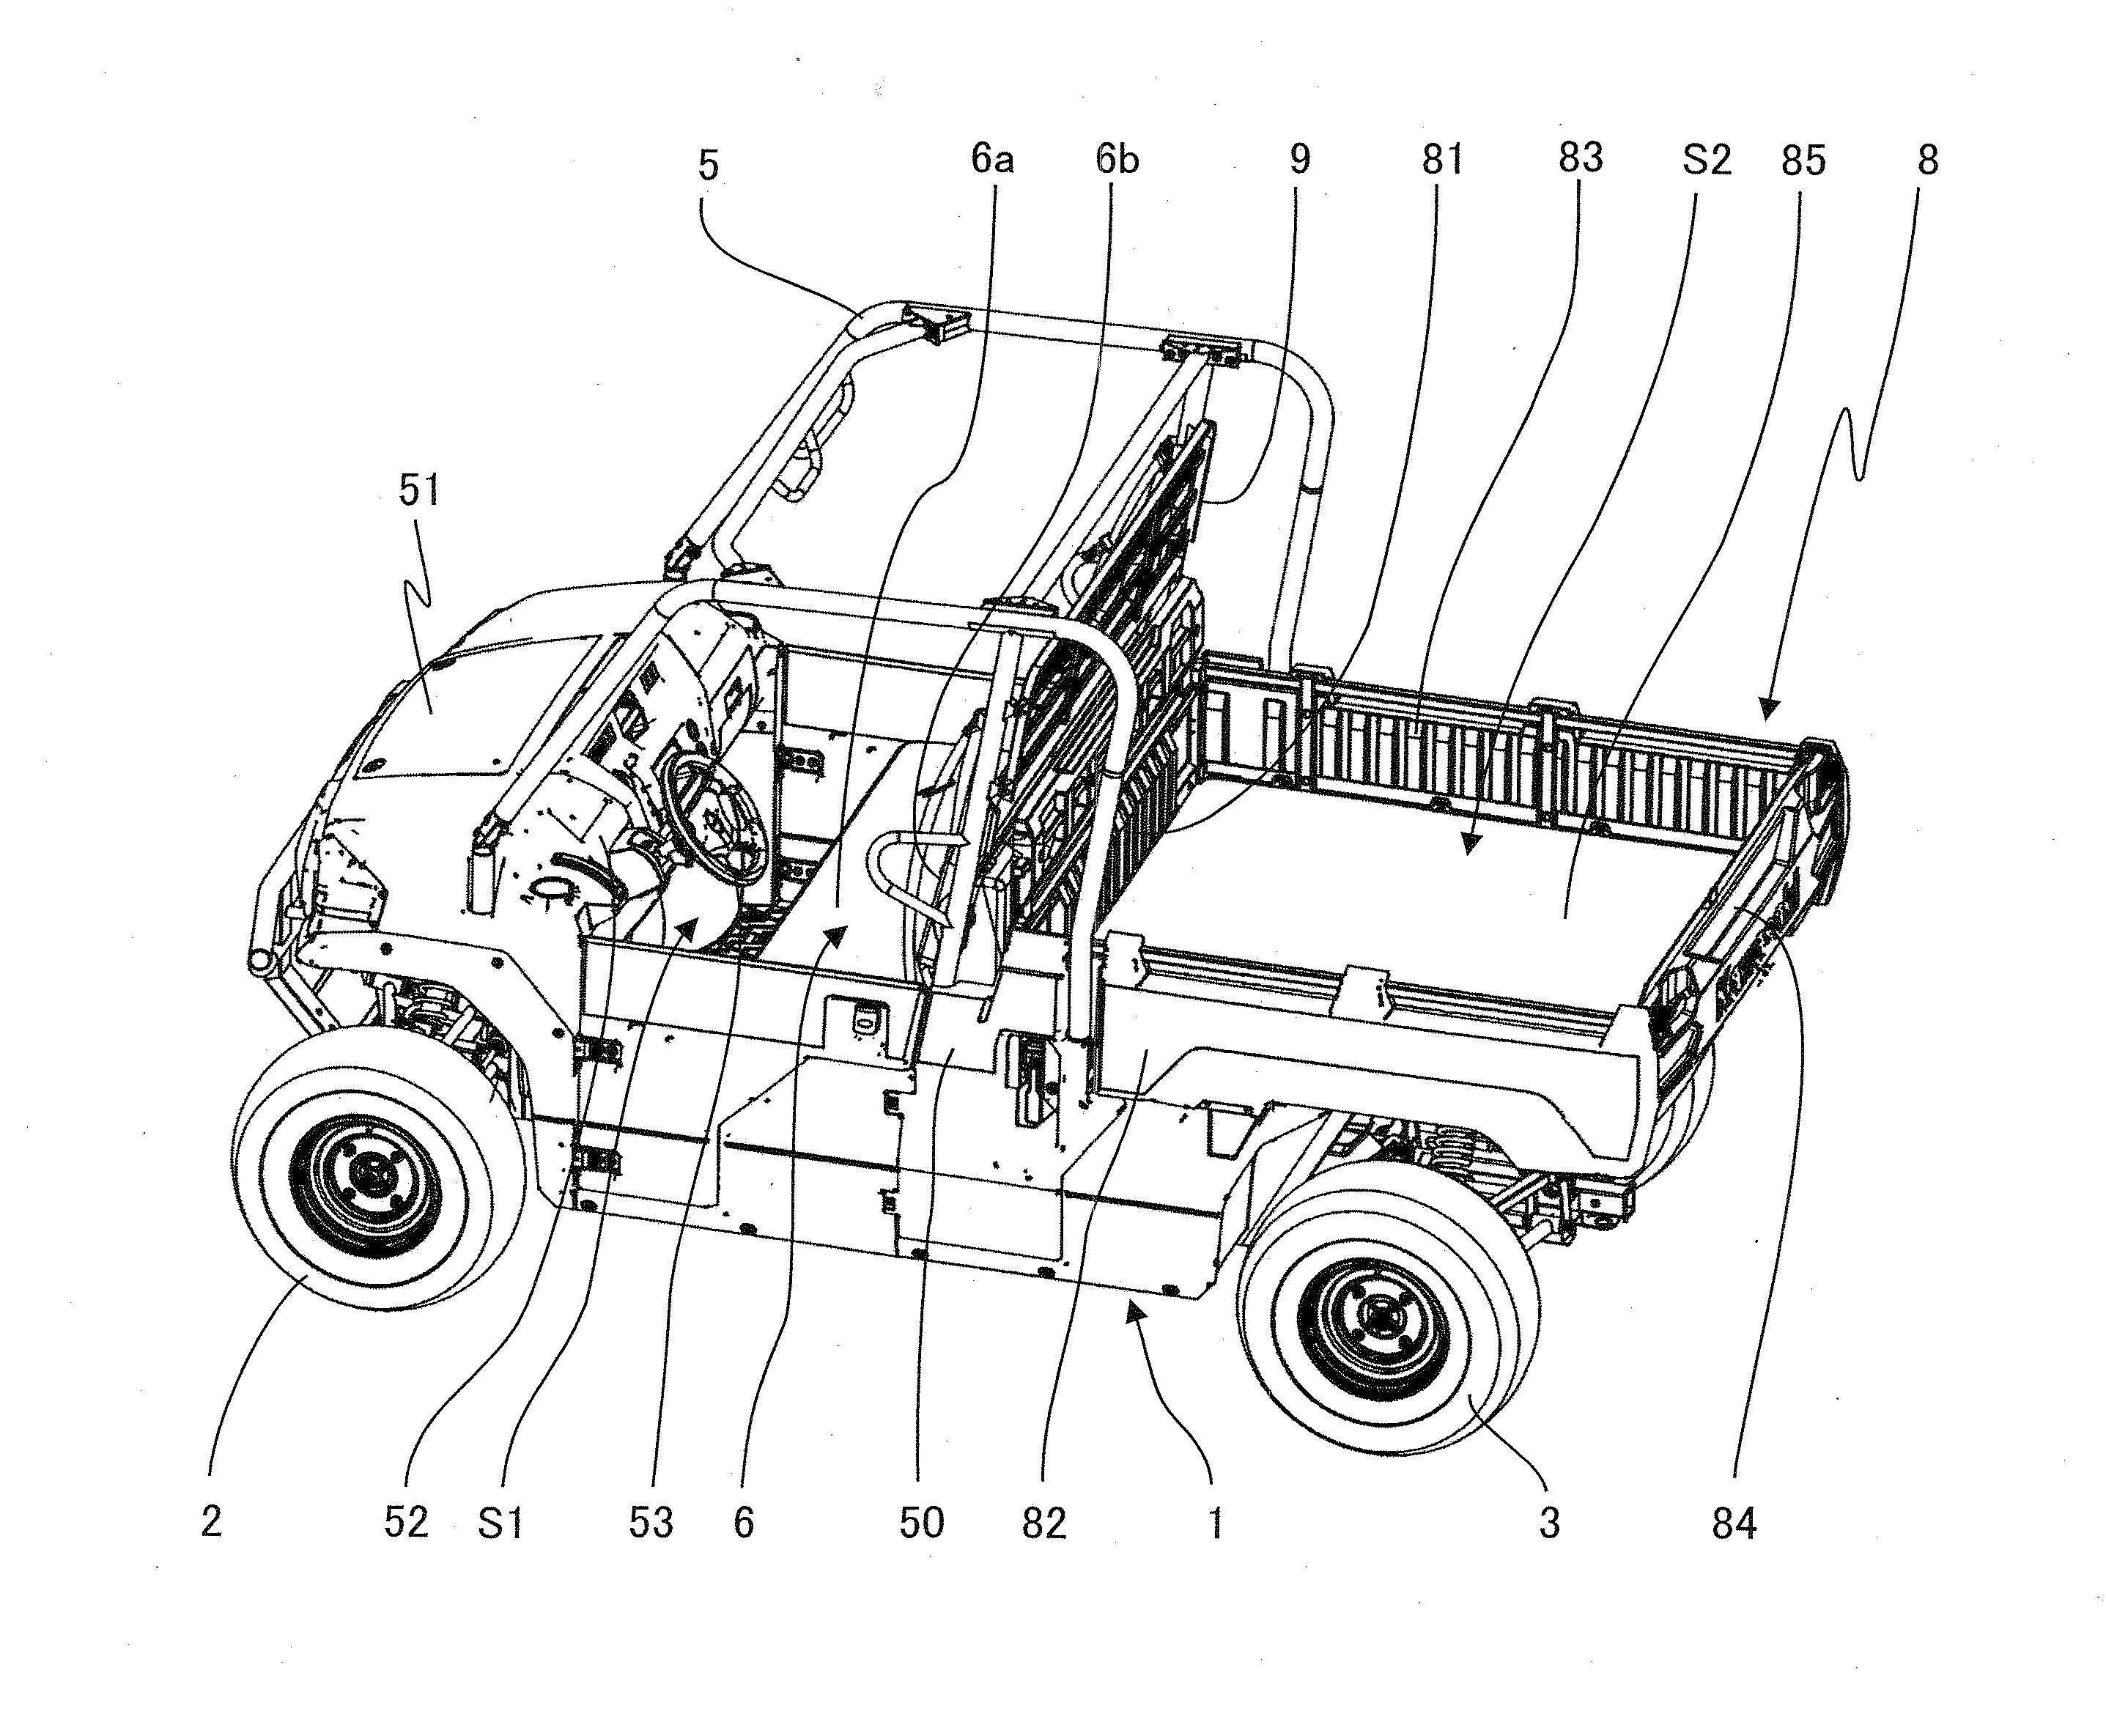 Cargo bed and utility vehicle with the cargo bed